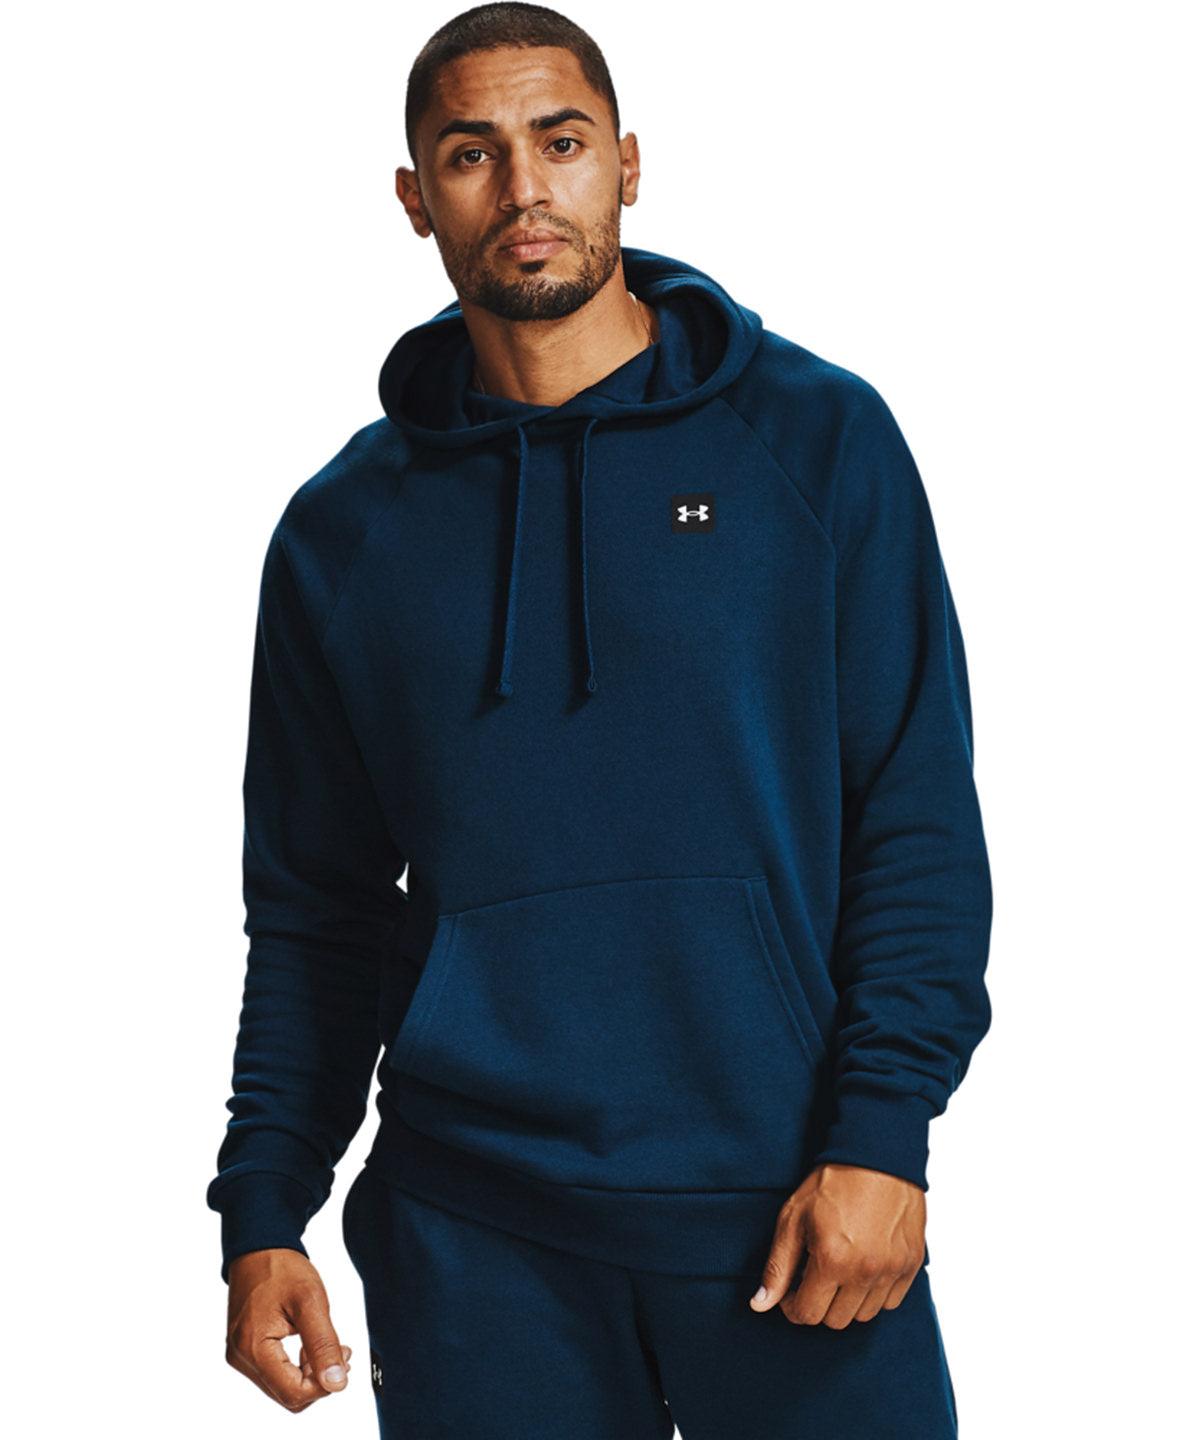 Black/Onyx White - Rival fleece hoodie Hoodies Under Armour Activewear & Performance, Back to the Gym, Exclusives, Gifting, Gymwear, Hoodies, Must Haves, New Colours For 2022, New Sizes for 2021, Outdoor Sports, Plus Sizes, Premium, Premium Sports, Sports & Leisure Schoolwear Centres